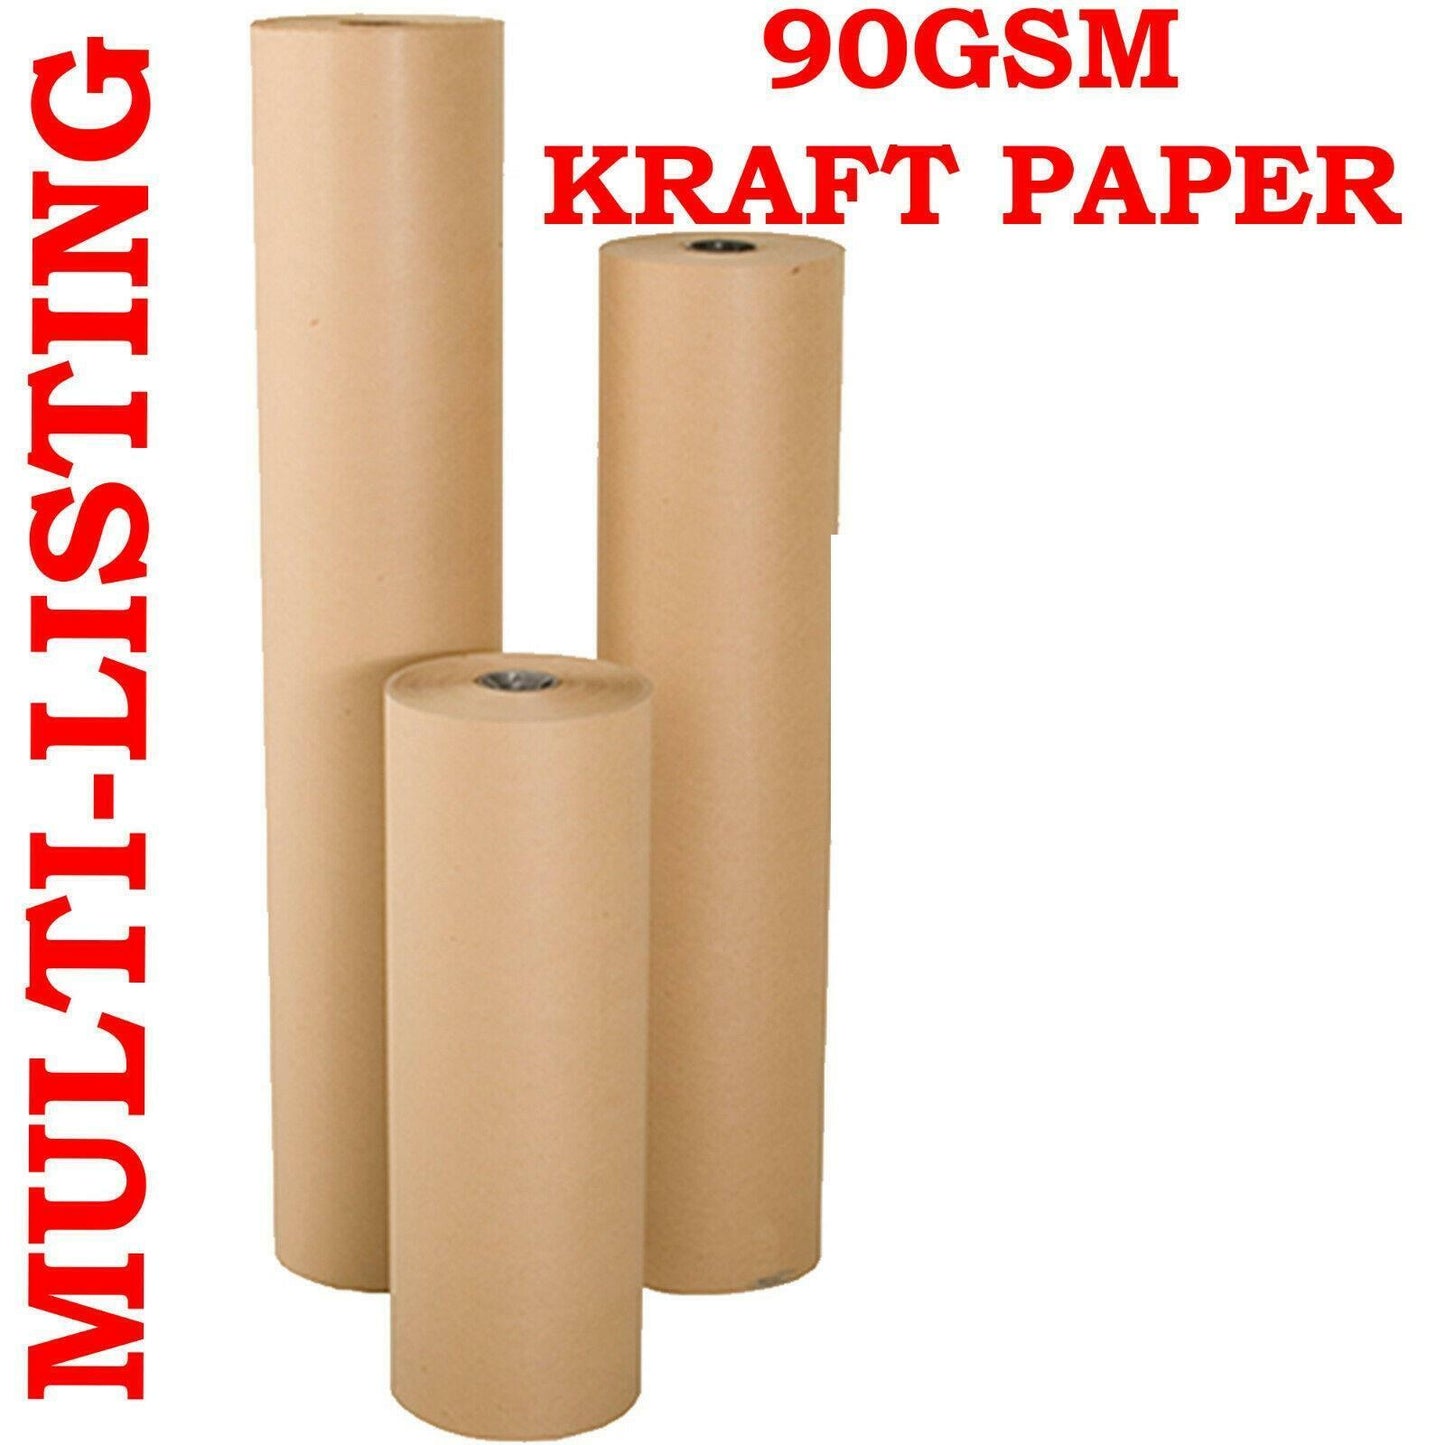 BROWN KRAFT PARCEL PAPER FOR WRAPPING PACKAGING PARCELS STRONG ROLLS 90GSM